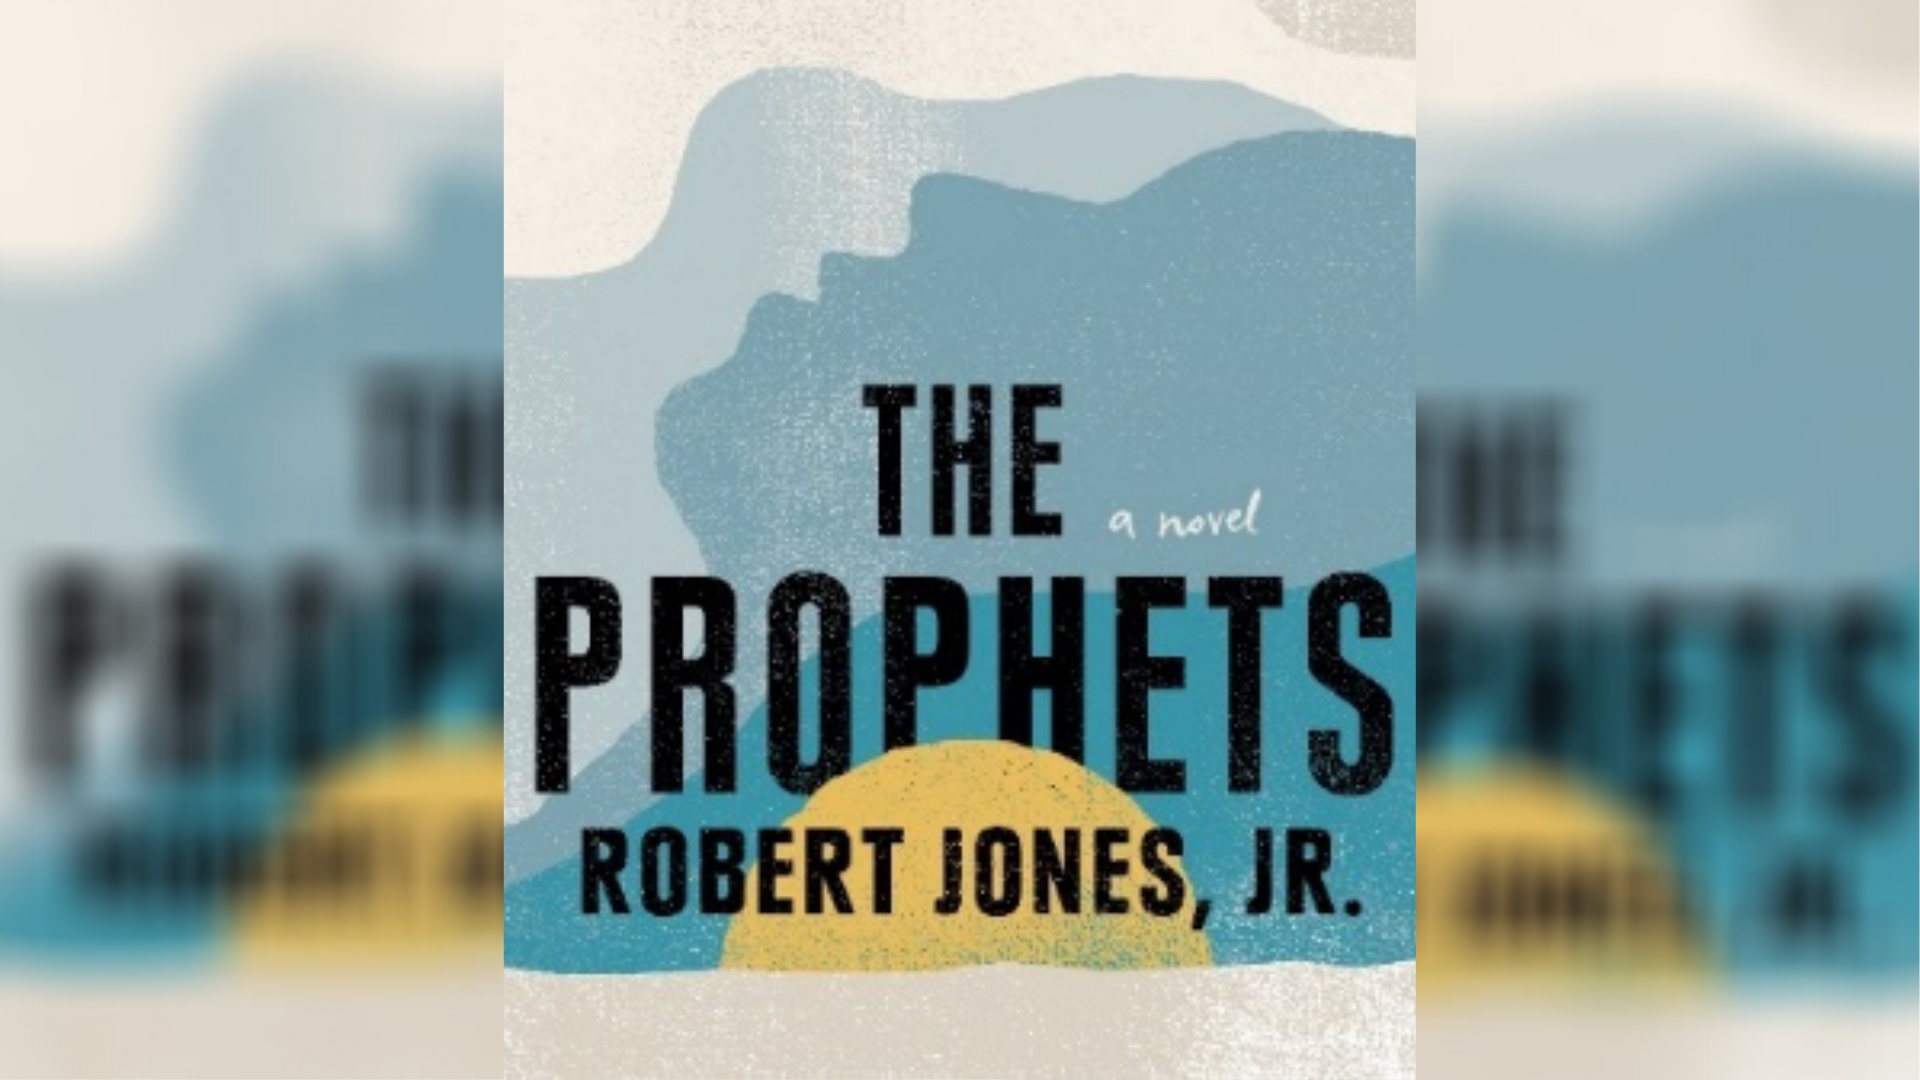 ‘The Prophets’ examines love between two enslaved Black men in antebellum South